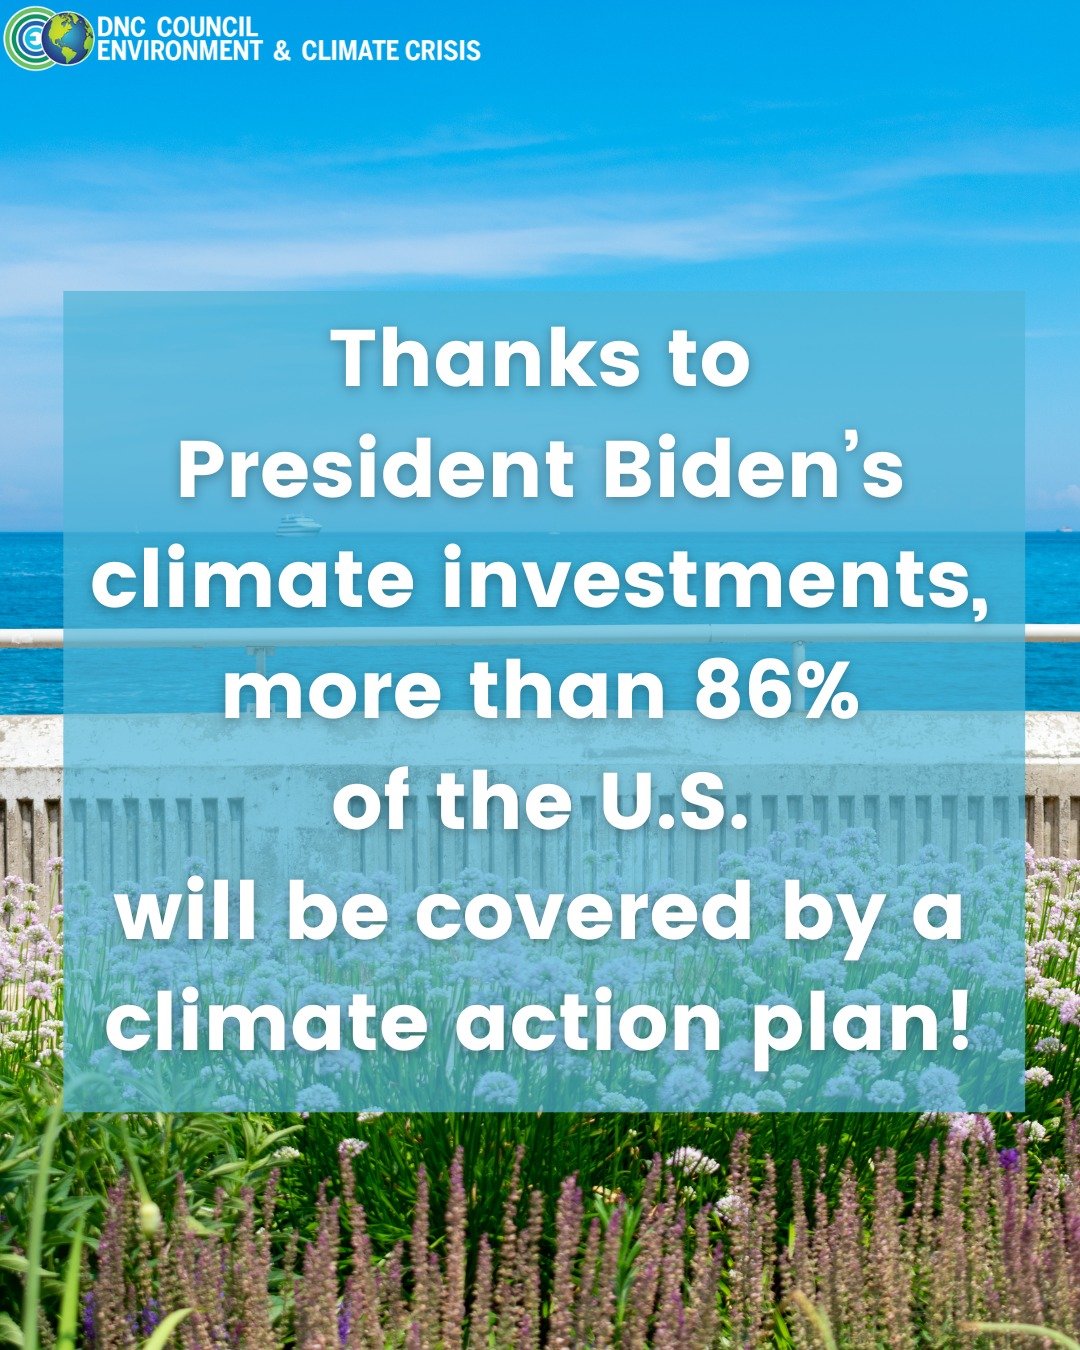 President @JoeBiden has spearheaded organized climate action across the nation.

45 states, over 200 tribes, and many major metropolitan areas are developing climate action plans!

This is the most comprehensive effort to address the climate crisis i